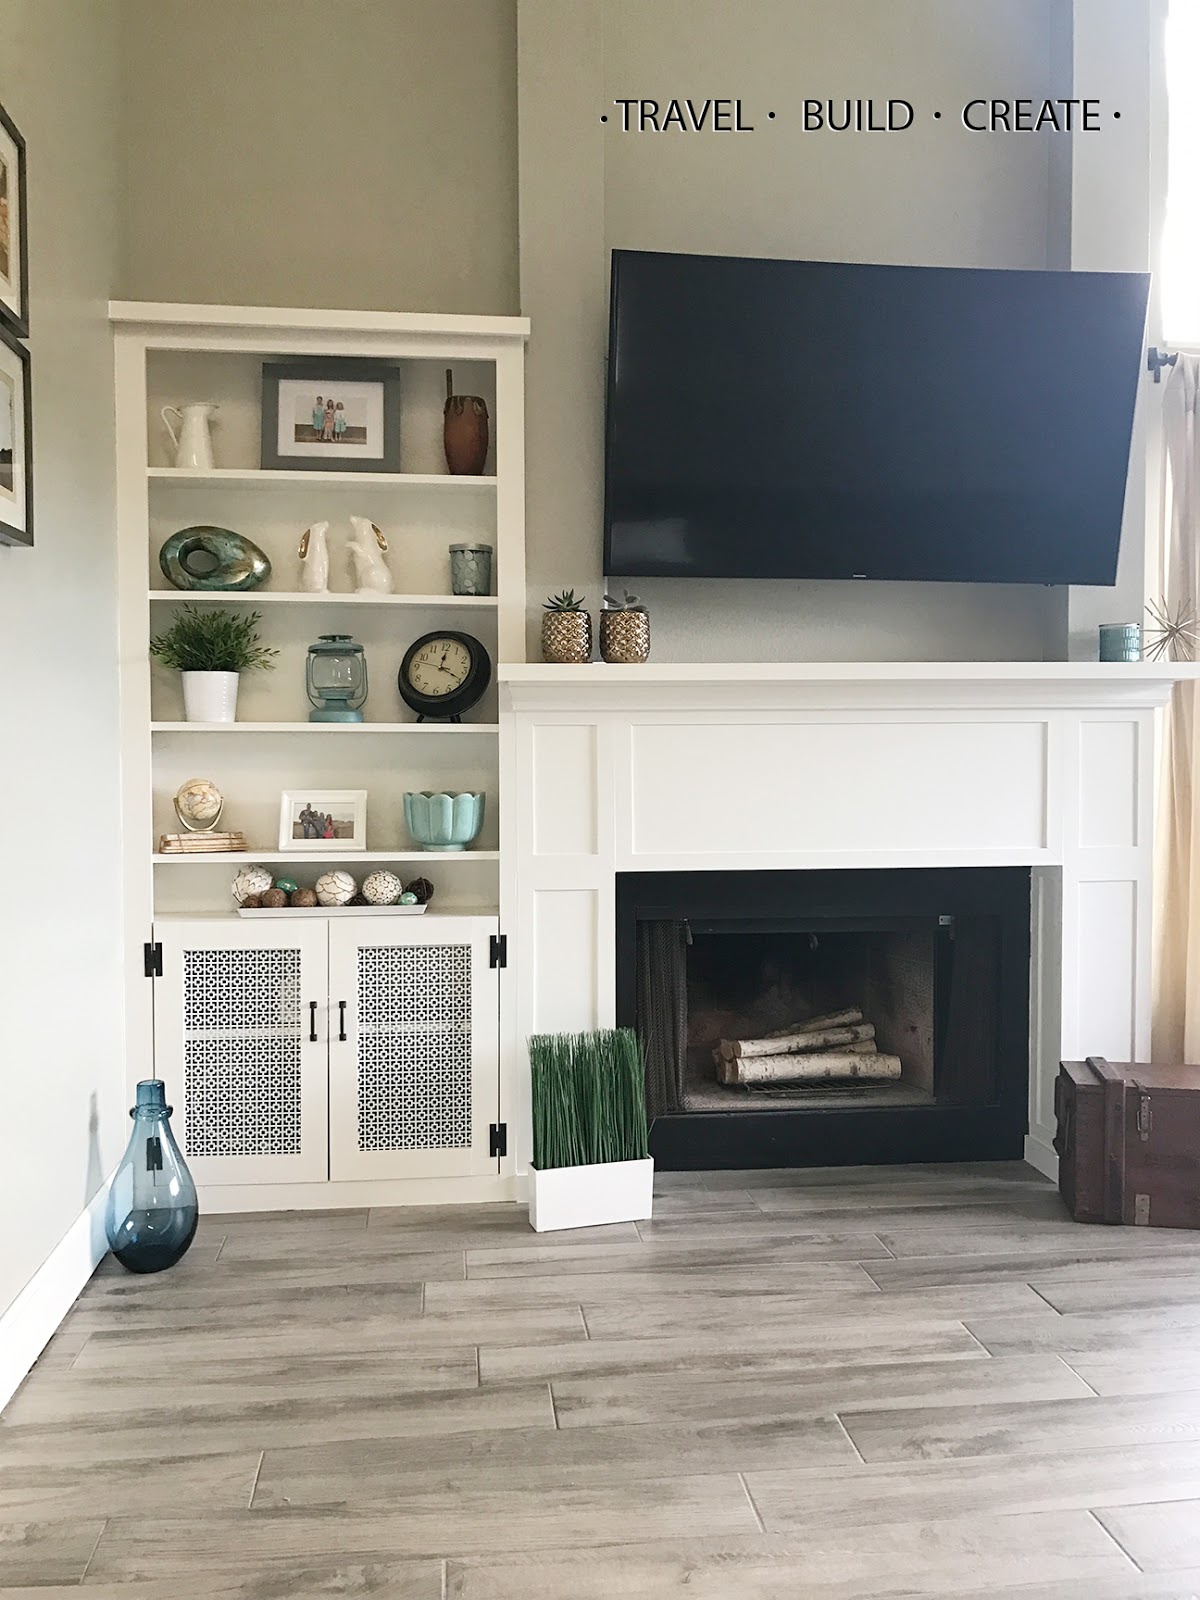 Diy Fireplace Surround And Built In, Bookshelves On One Side Of Fireplace